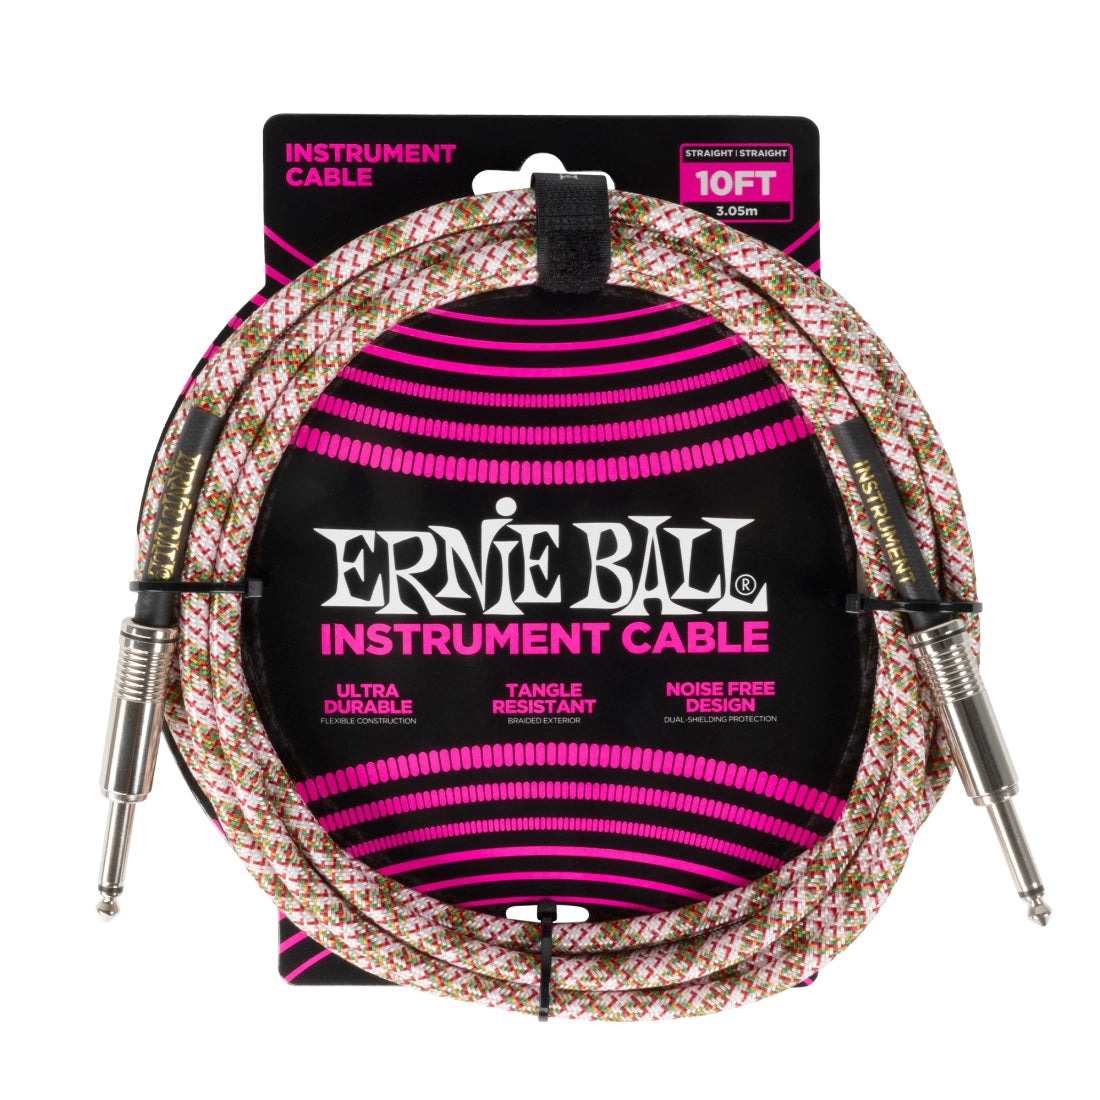 Ernie Ball 10ft Braided Instrument Cable - Emerald Argyle - Joondalup Music Centre